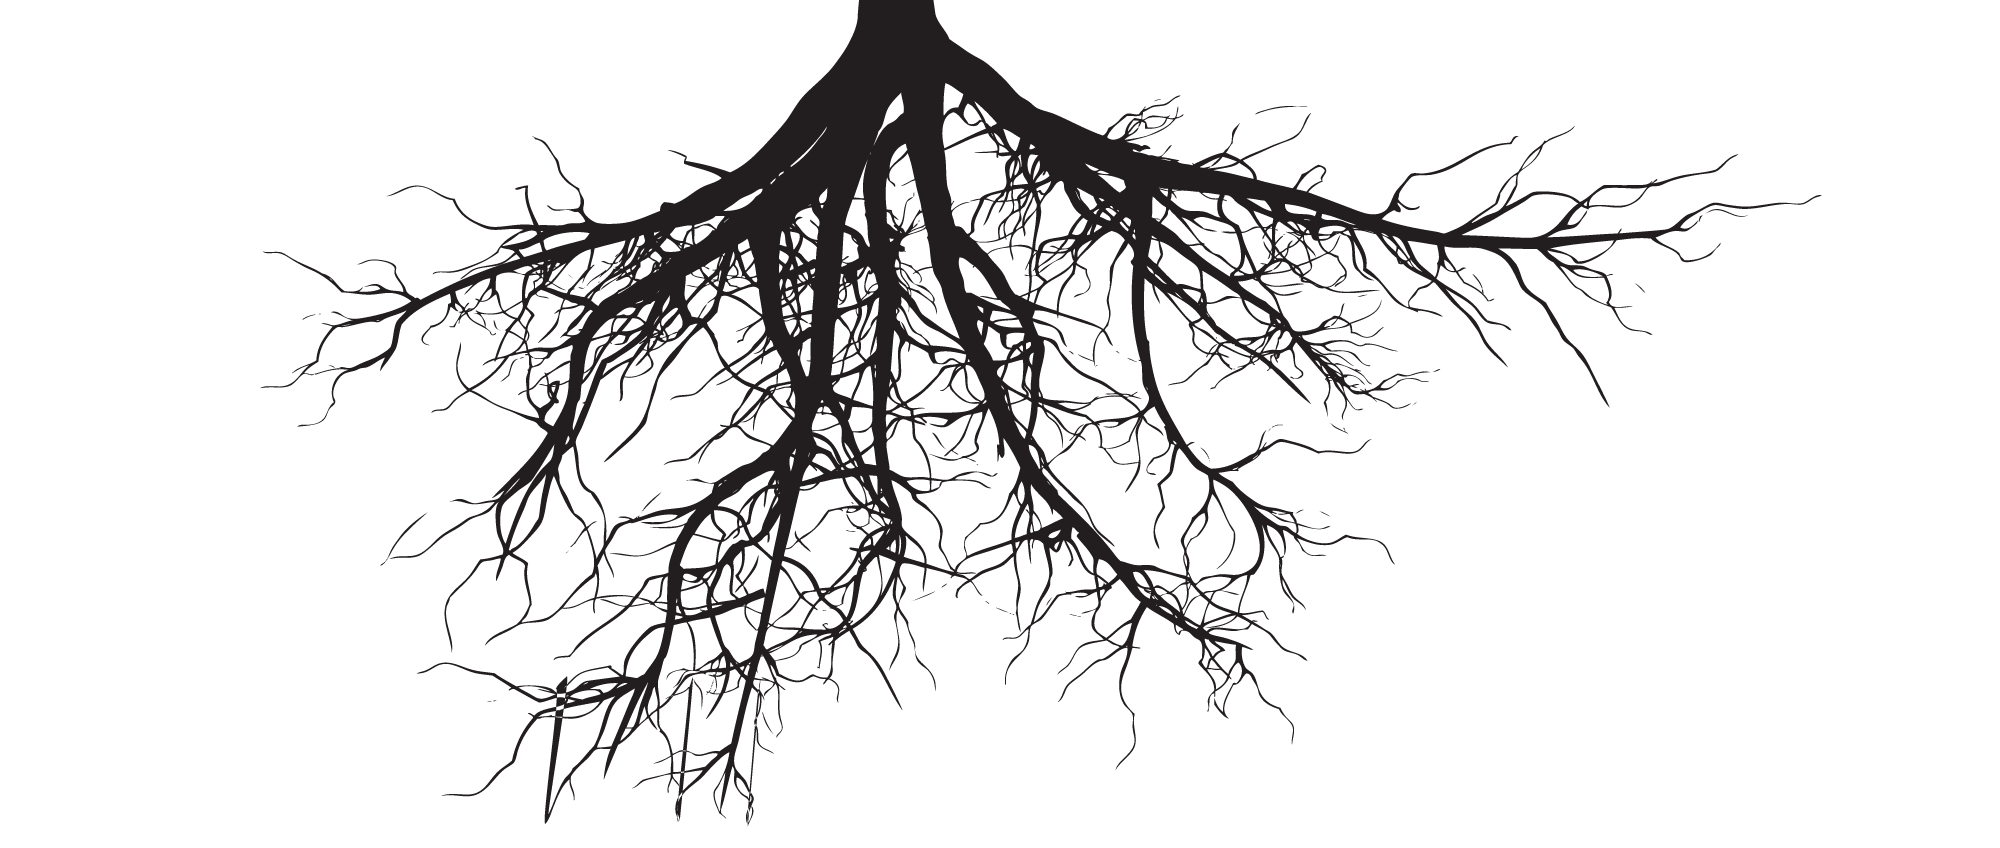 roots clipart pine tree